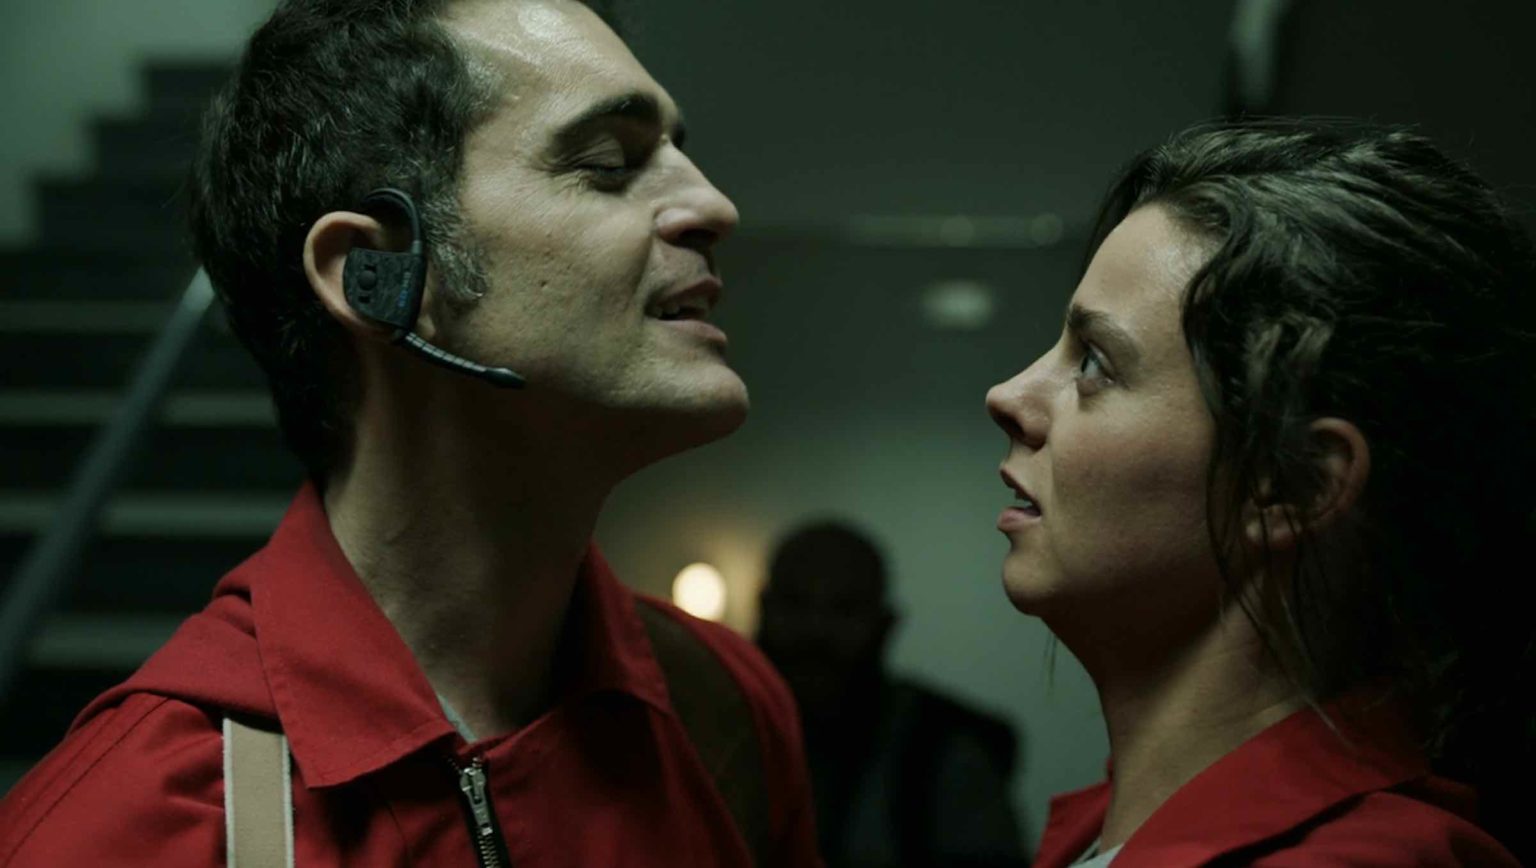 Berlin (Pedro Alonso) is the crazy psychopath with standards from 'Money Heist'. Here's what we know about Berlin and season 4.